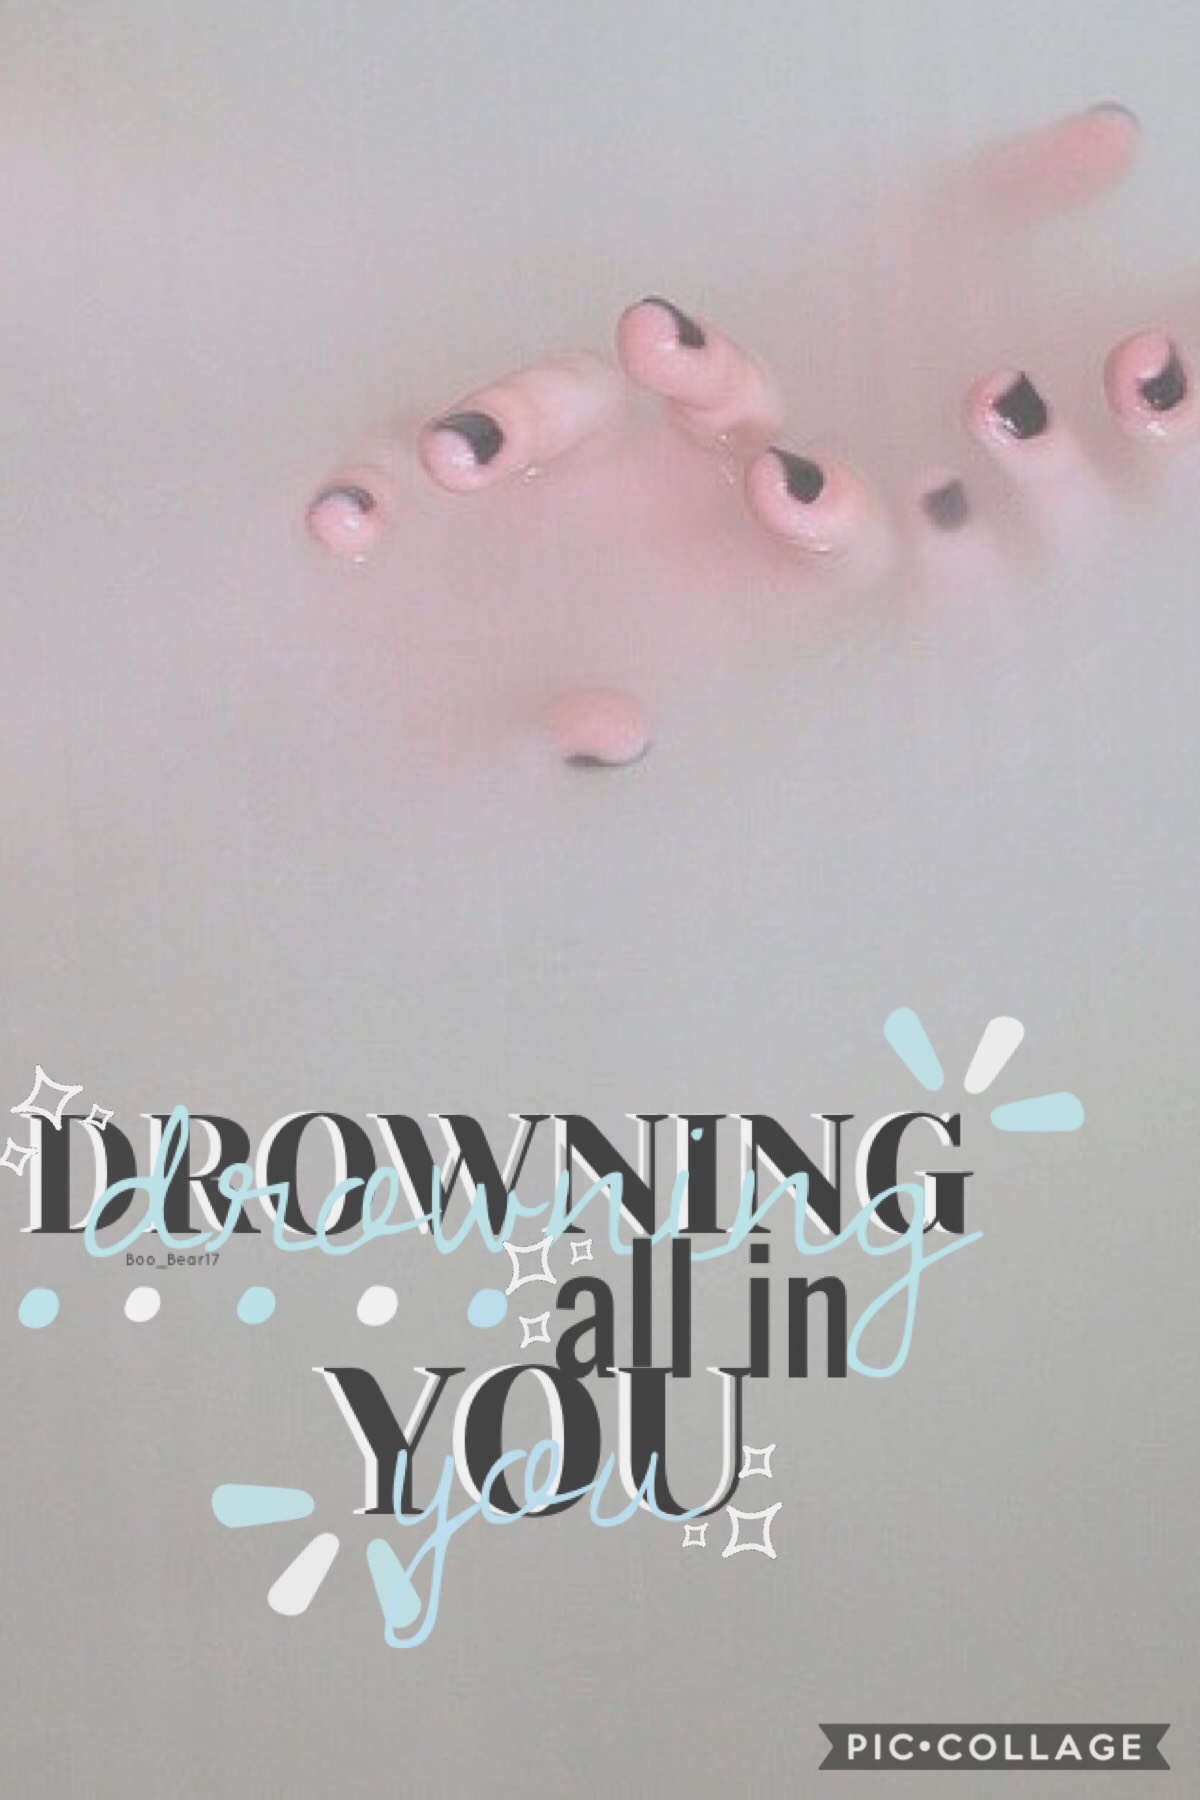 🖤drowning all in you🖤
•haven’t made an edit in a while, and idk if I’ll change my style
•been obsessed with Dorothy lately 
•song rec: Shelter by Dorothy